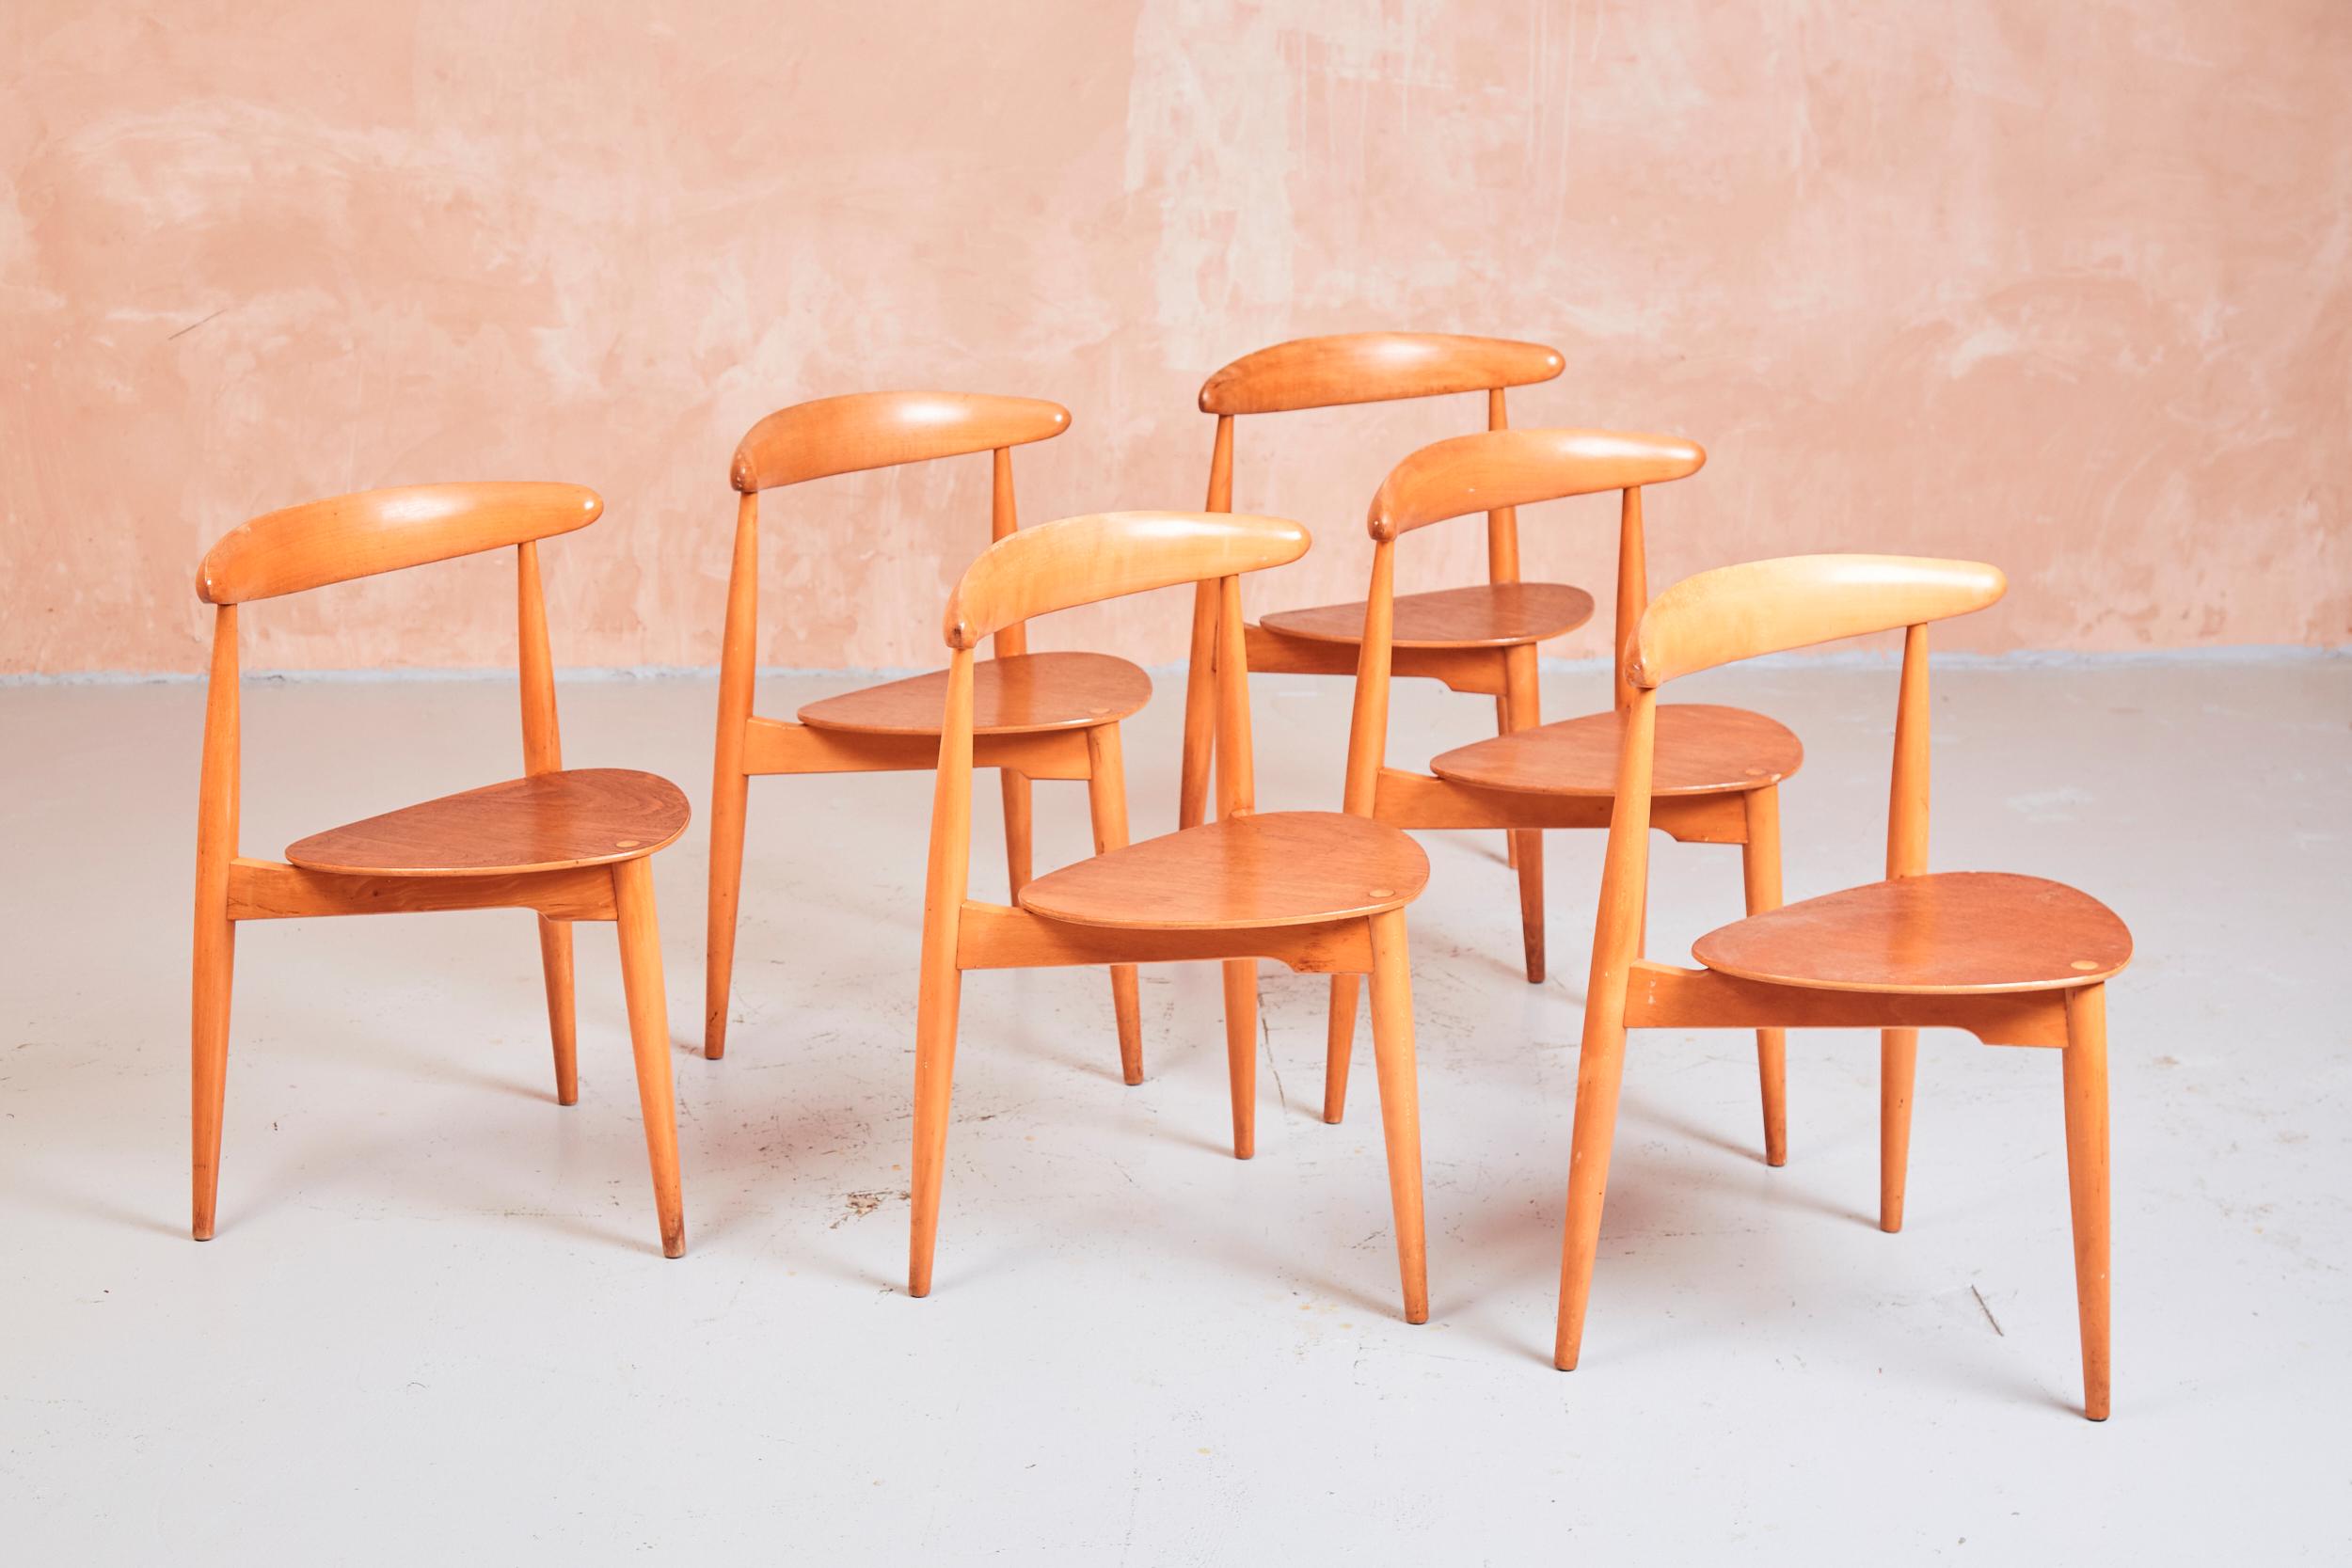 Originally designed by Hans Wegner in the 1950s, the FH4103 was manufactured by Fritz Hansen and sold in London by Story’s of Kensington.

Constructed from beech and teak wood, the FH4103 chairs are also known as the ‘heart’ chairs, due to their